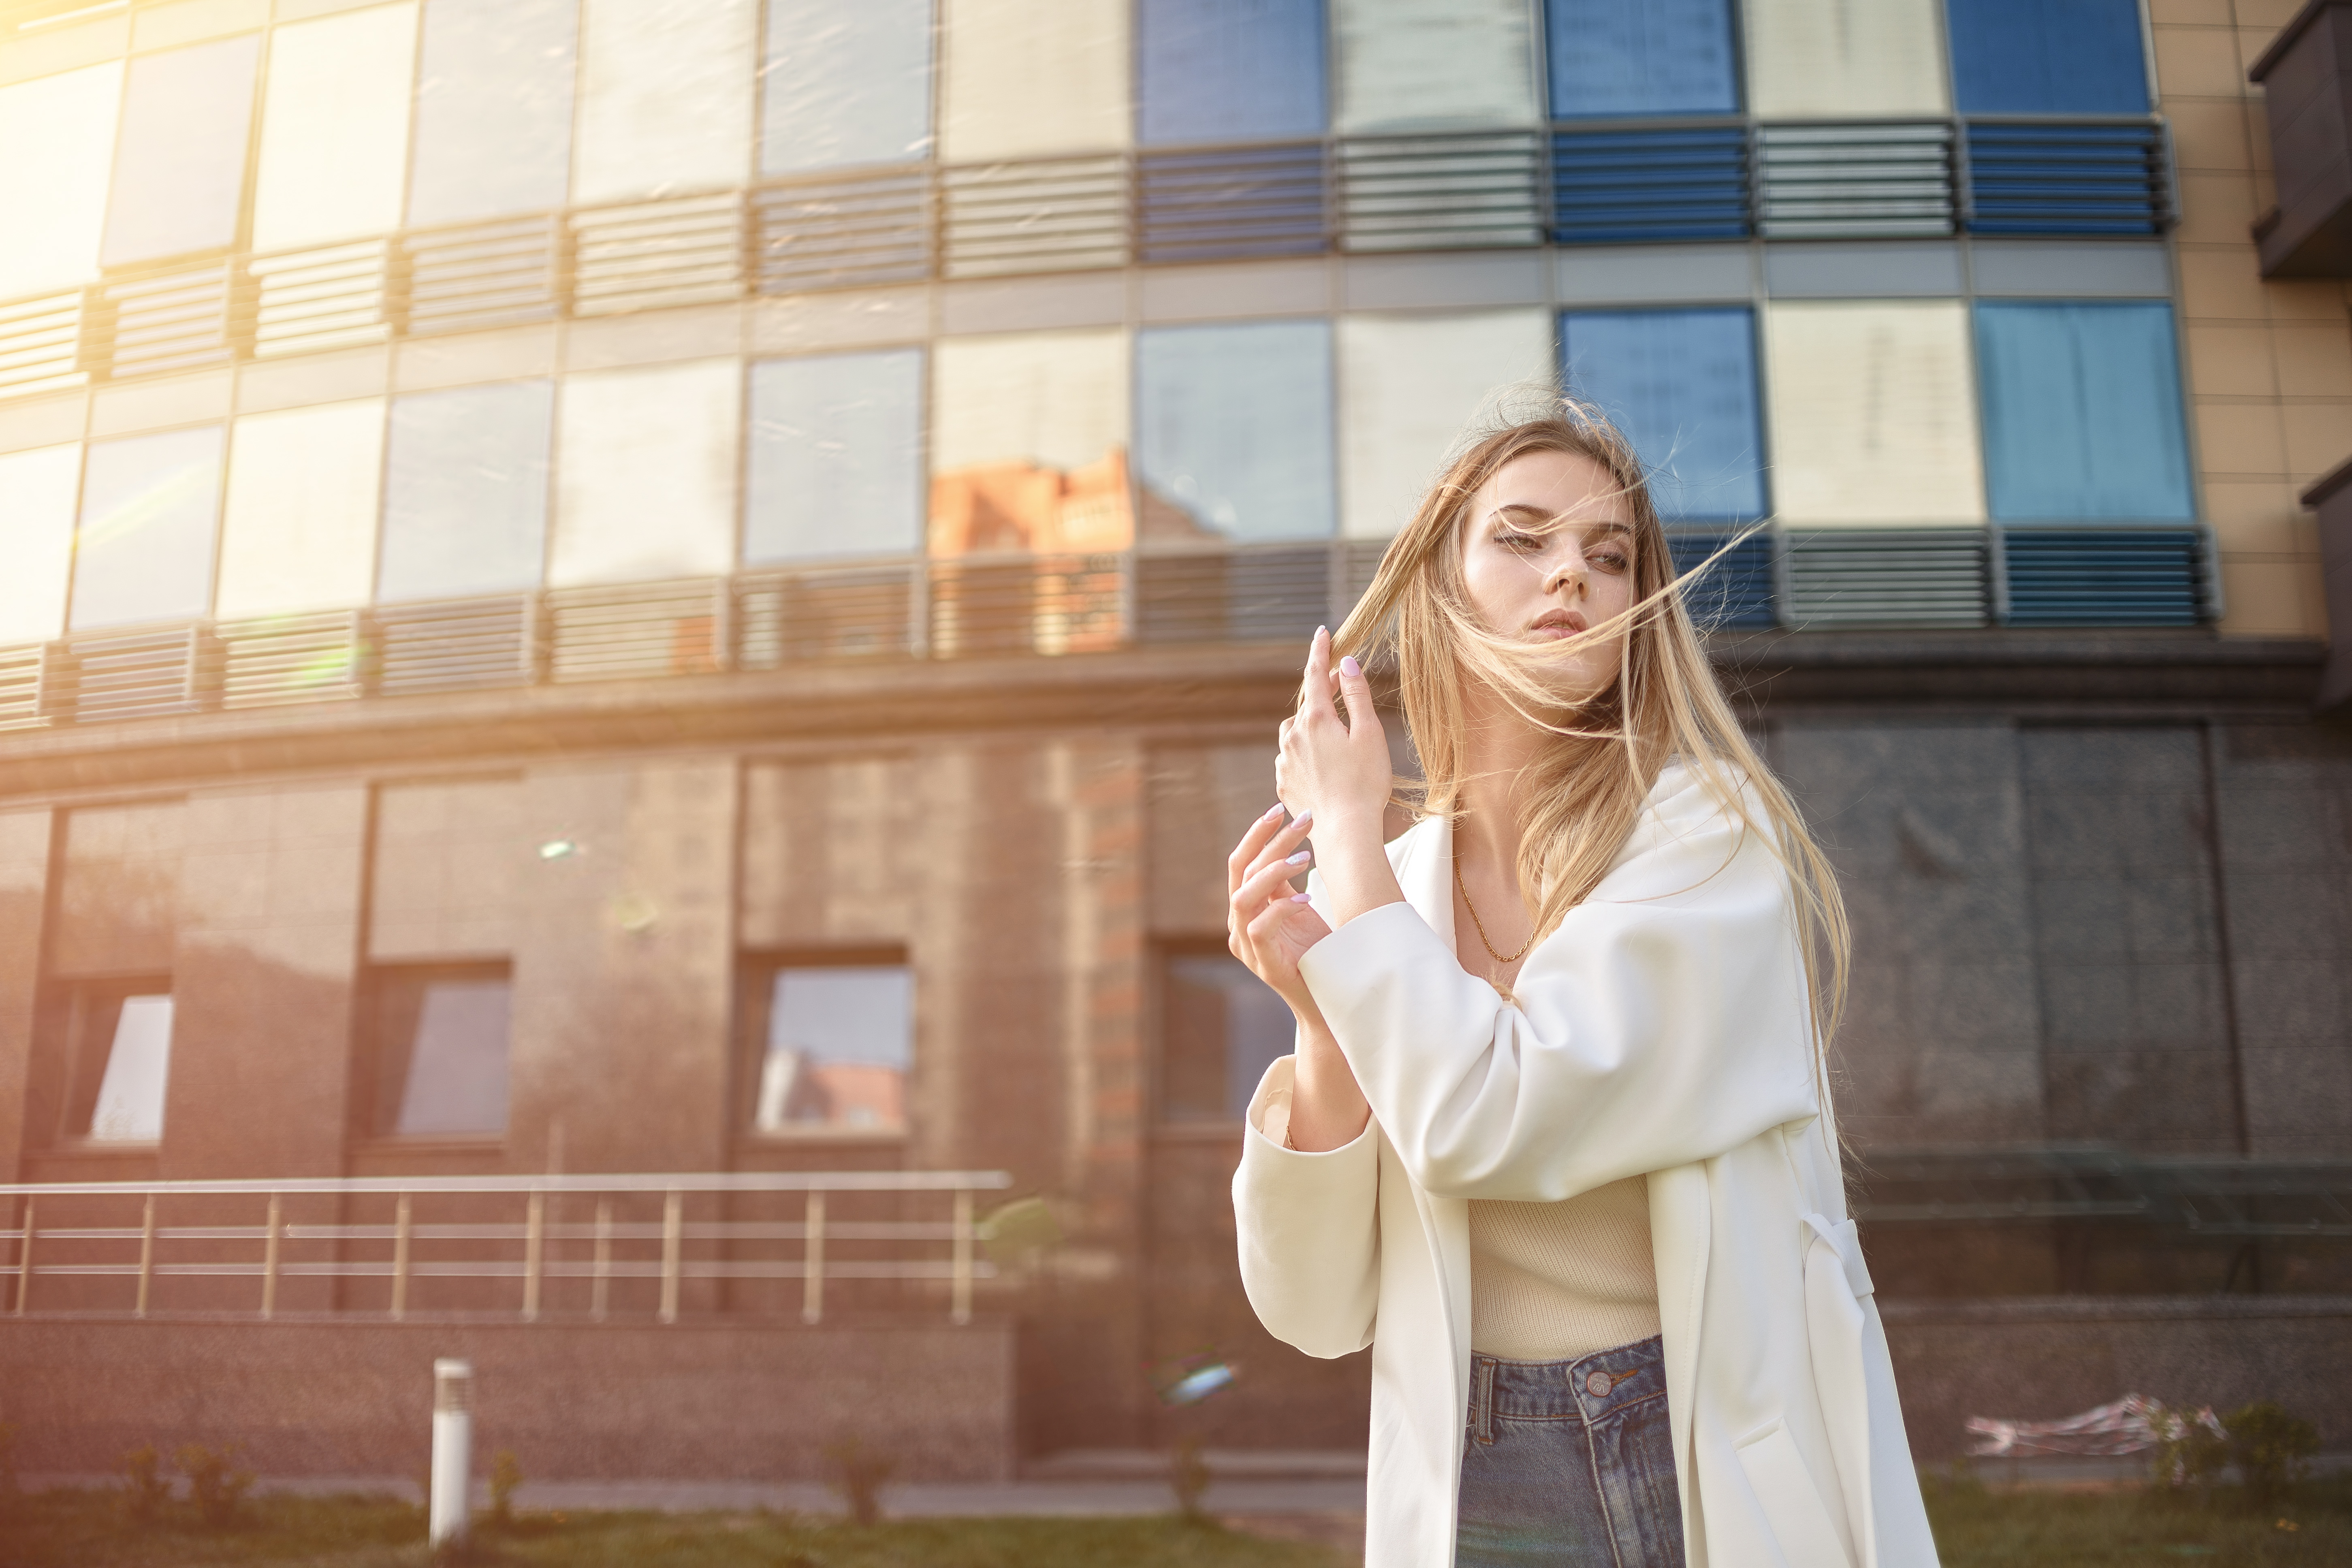 People 5806x3871 women Dmitry Medved blonde jeans white coat coats windy hair in face overcoats hair blowing in the wind urban open coat women outdoors looking away long hair model white clothing